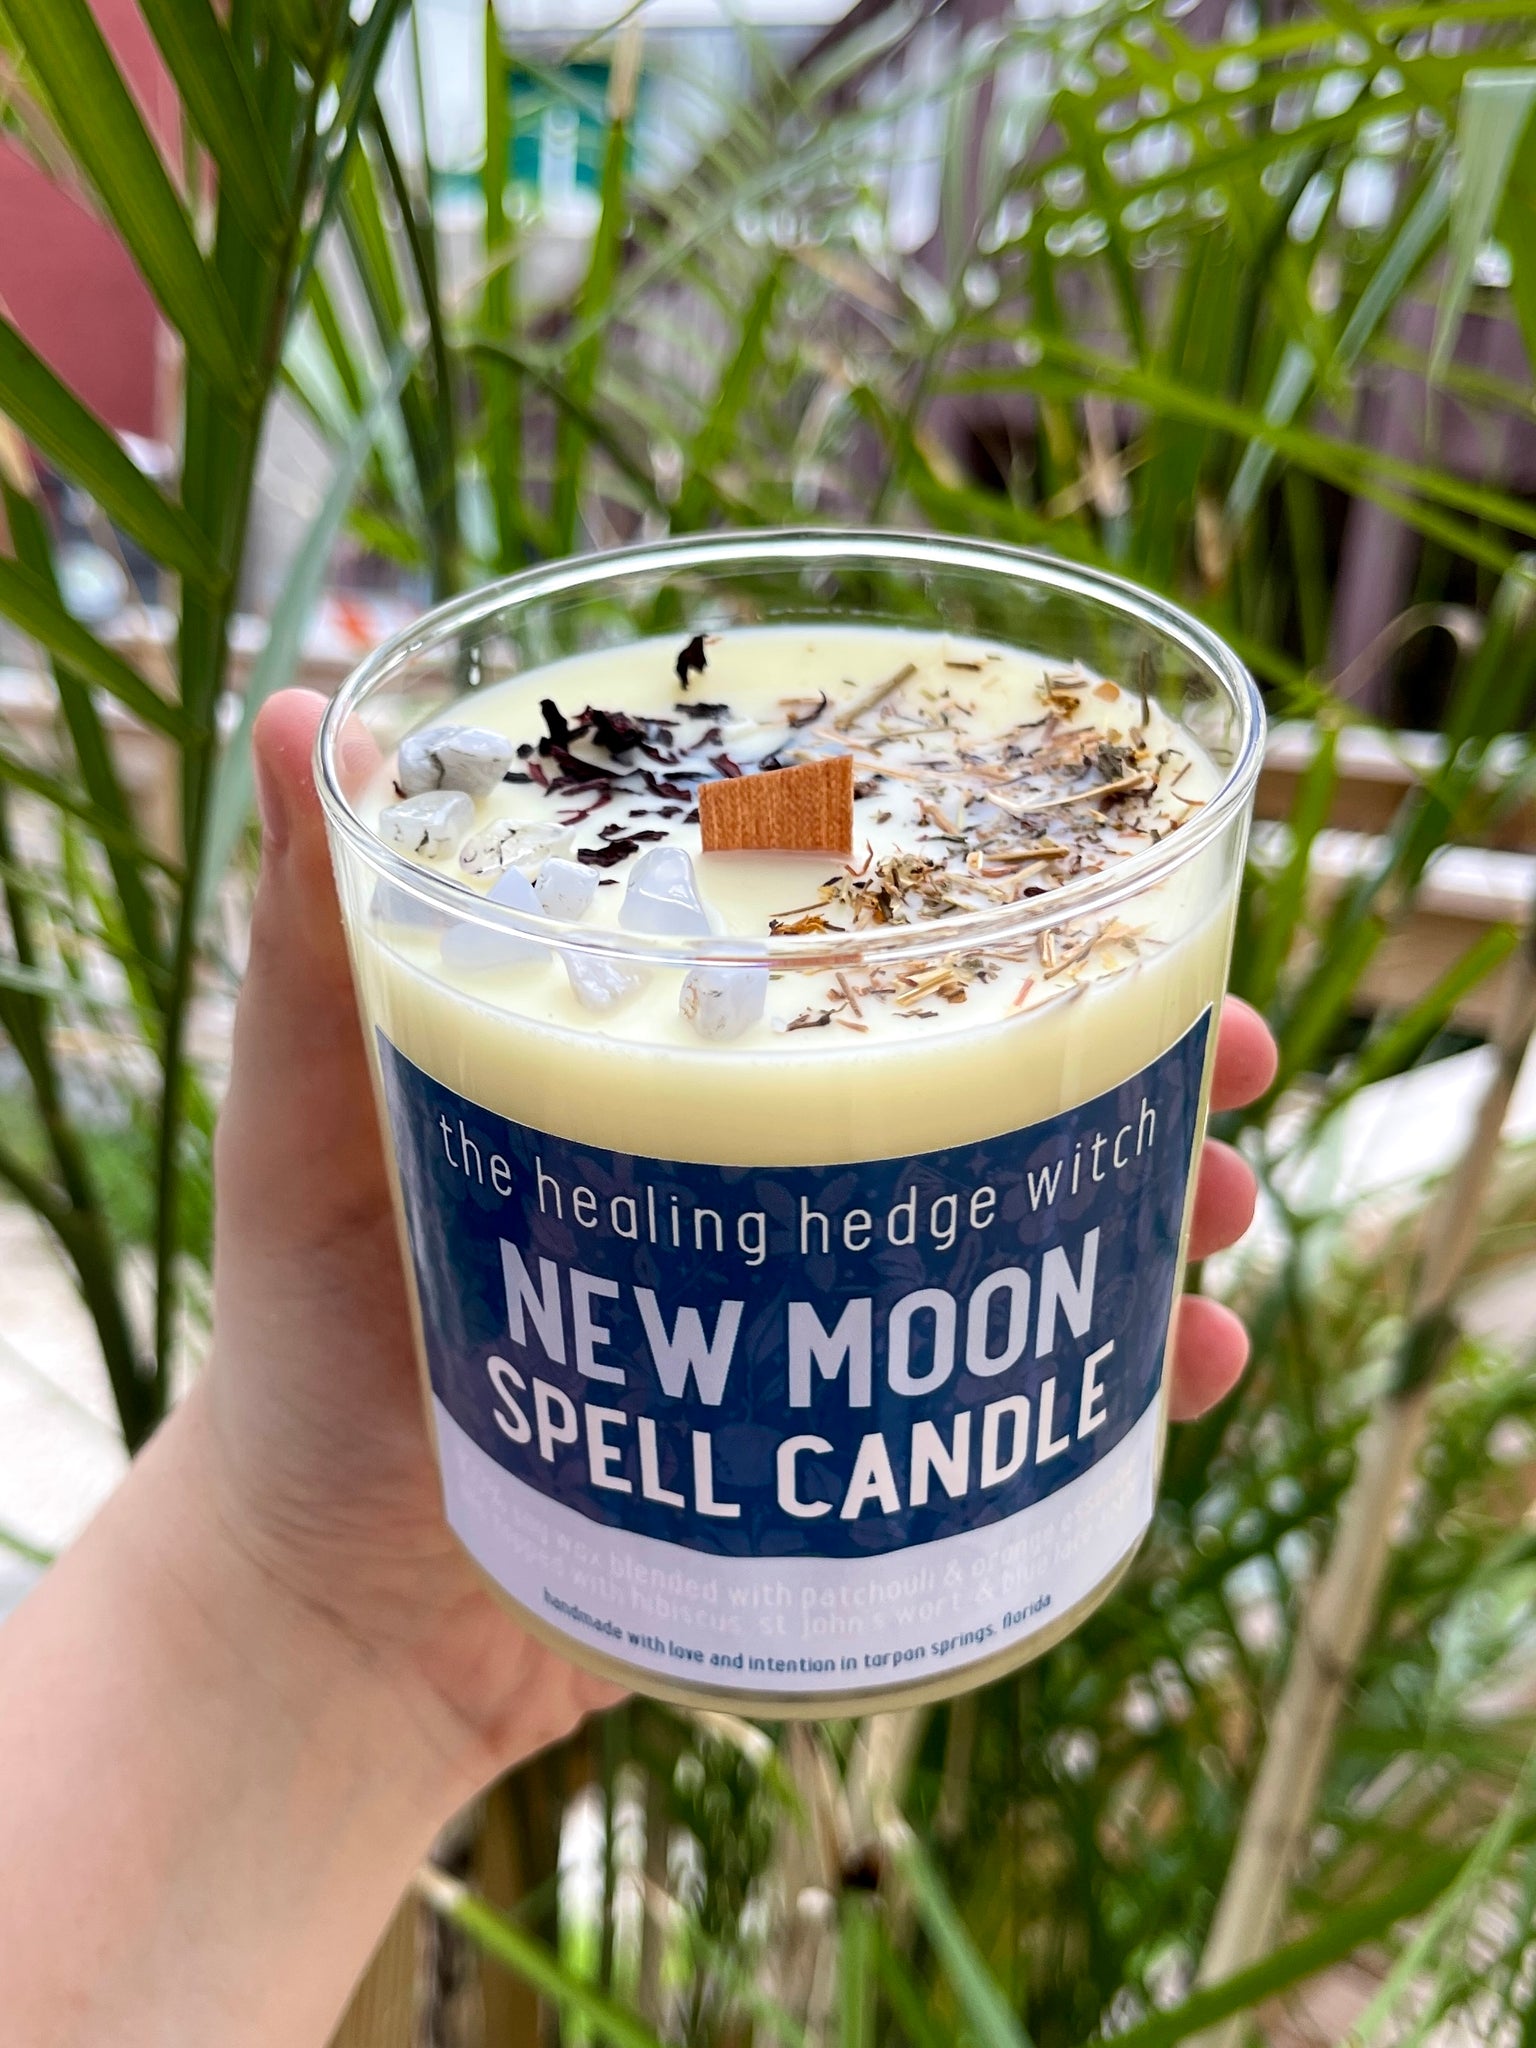 New Moon Spell Candle